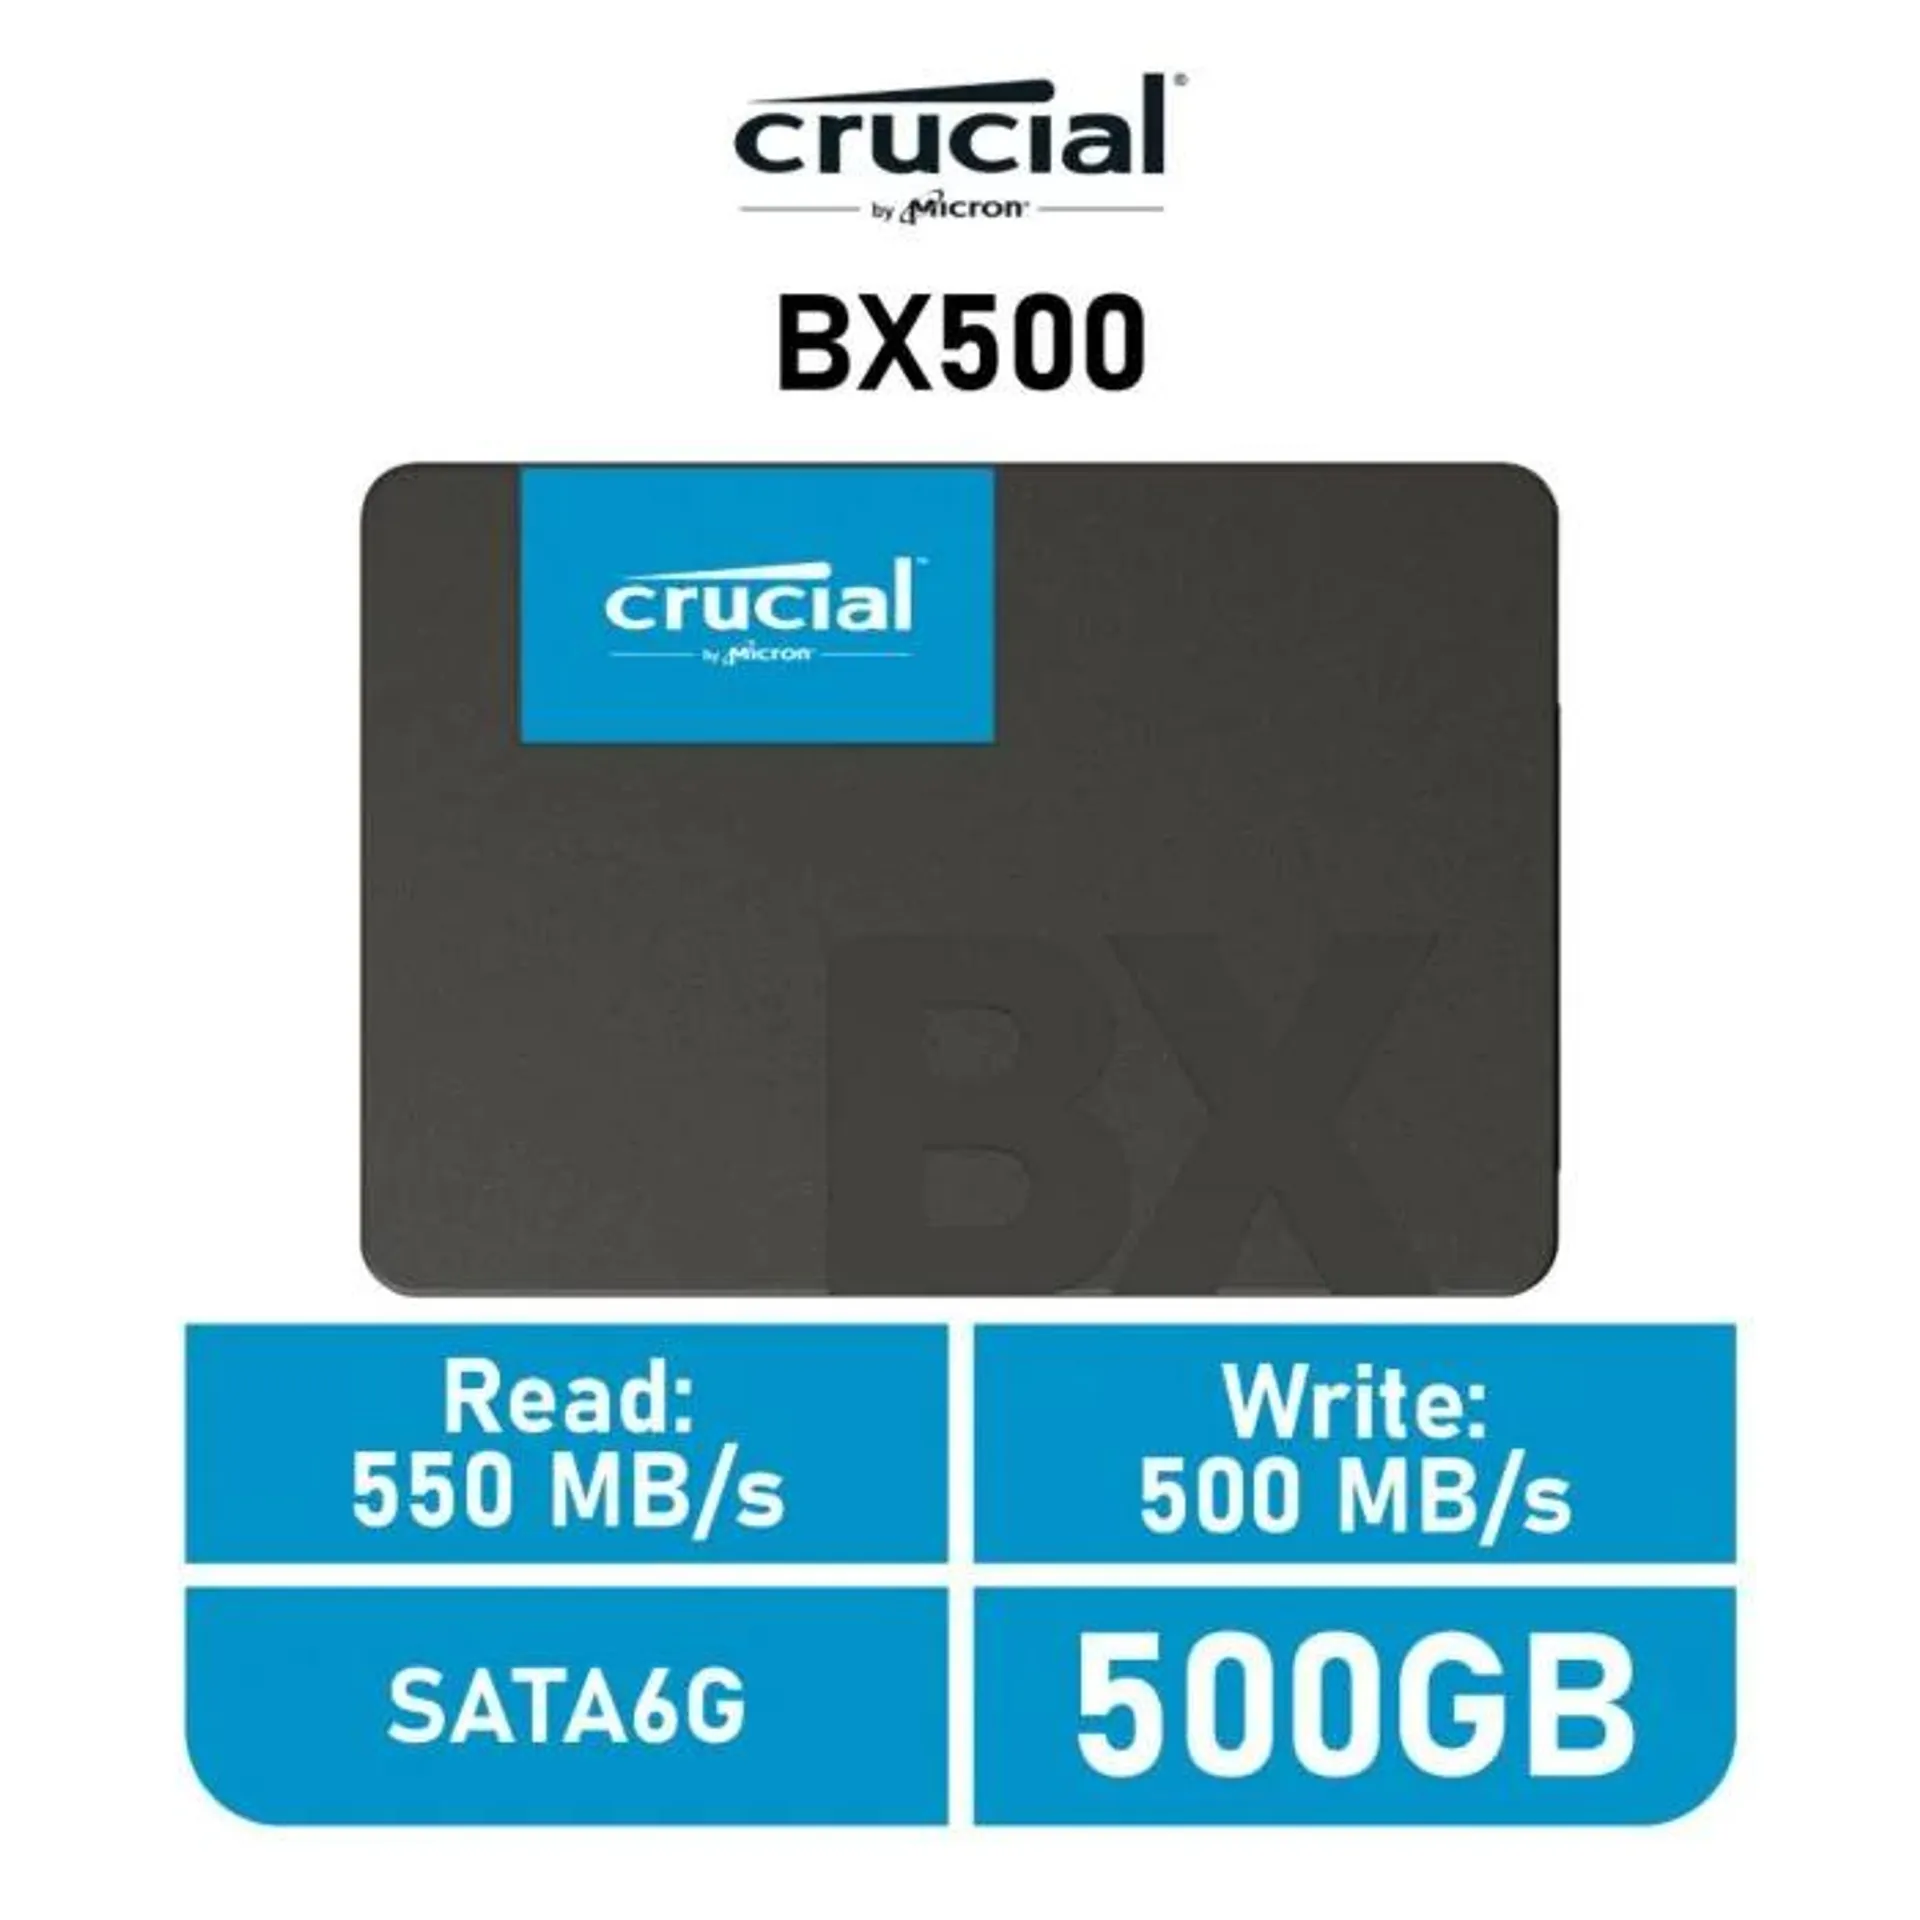 Crucial BX500 500GB SATA6G CT500BX500SSD1 2.5" Solid State Drive